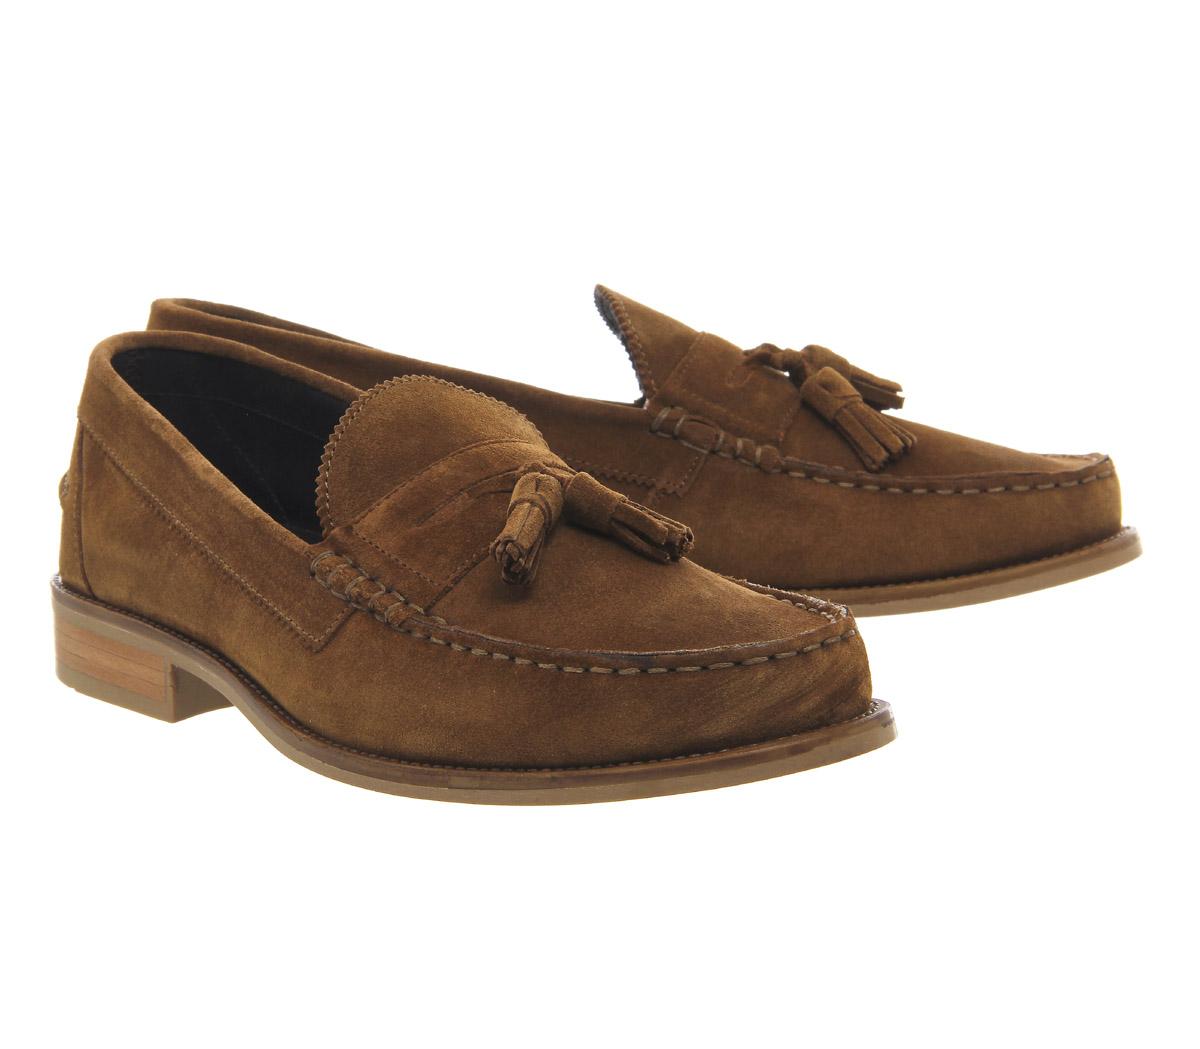 Ask the Missus Bonjourno Tassel Loafers Rust Suede - Casual